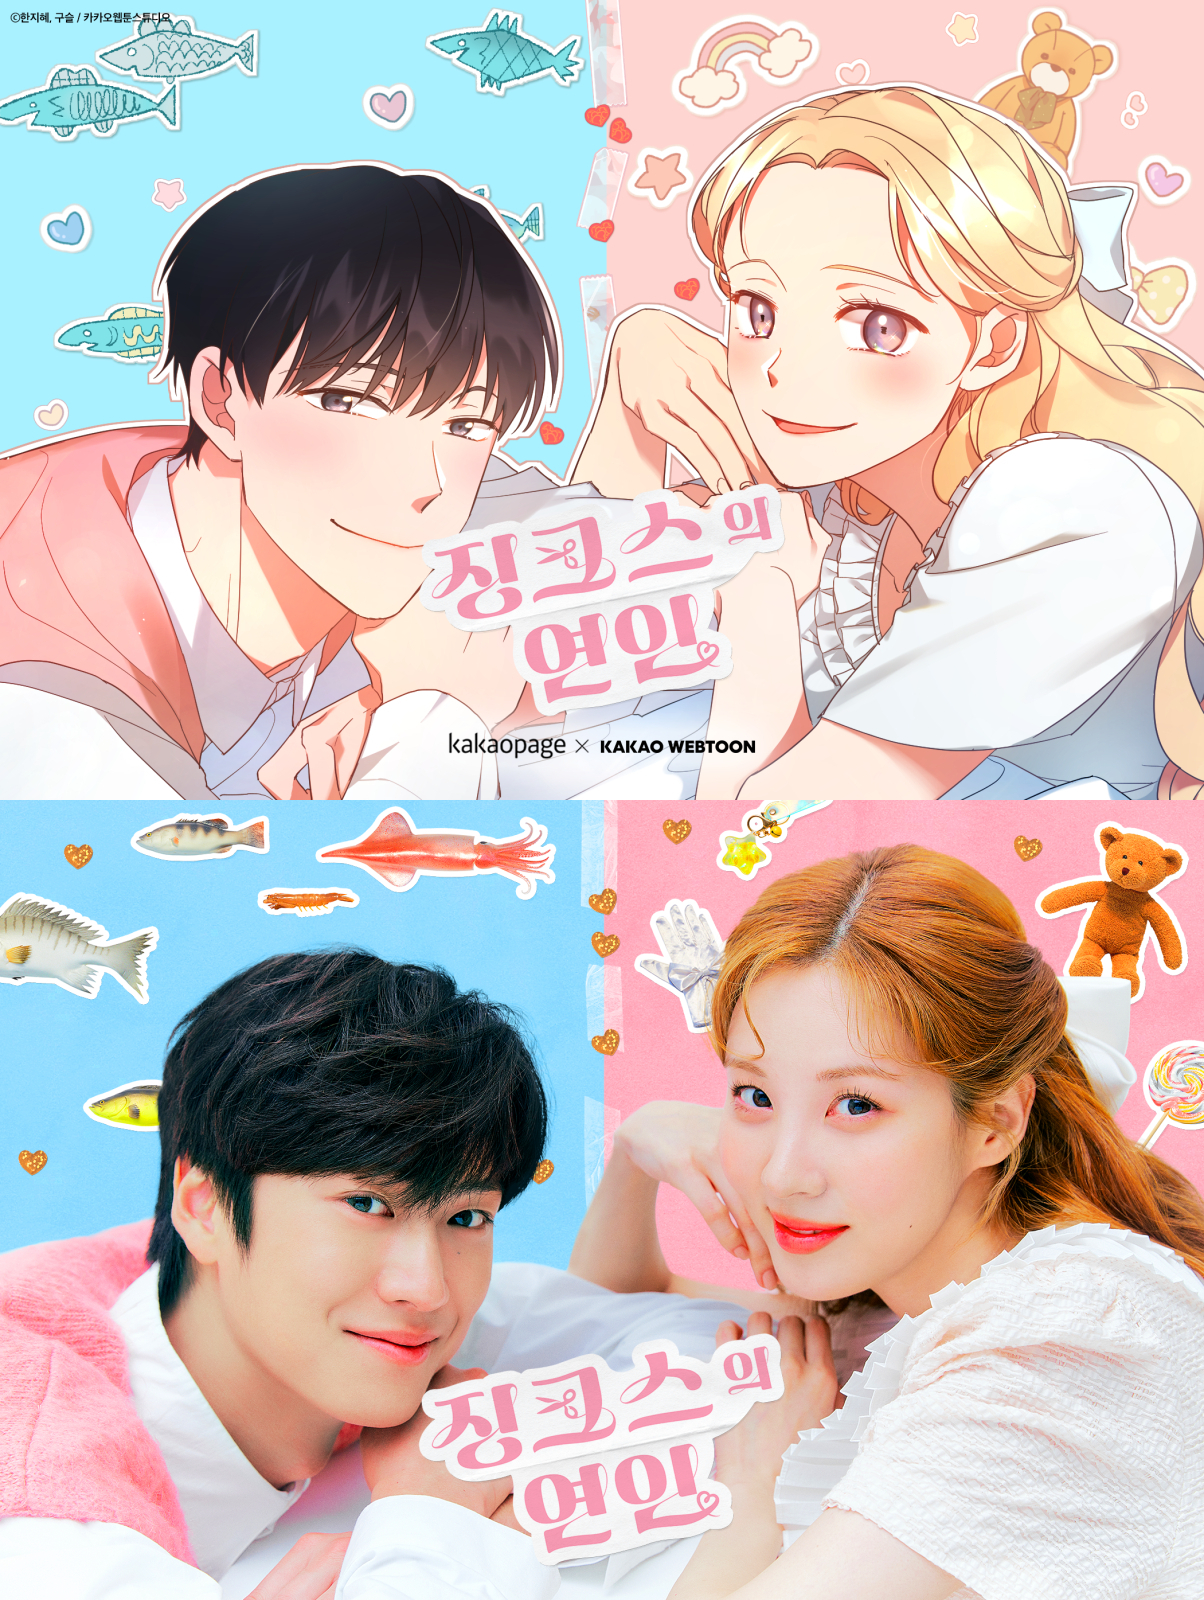 Cover images of webtoon and TV series of “Jinxed at First” (Kakao Entertainment, KBS)